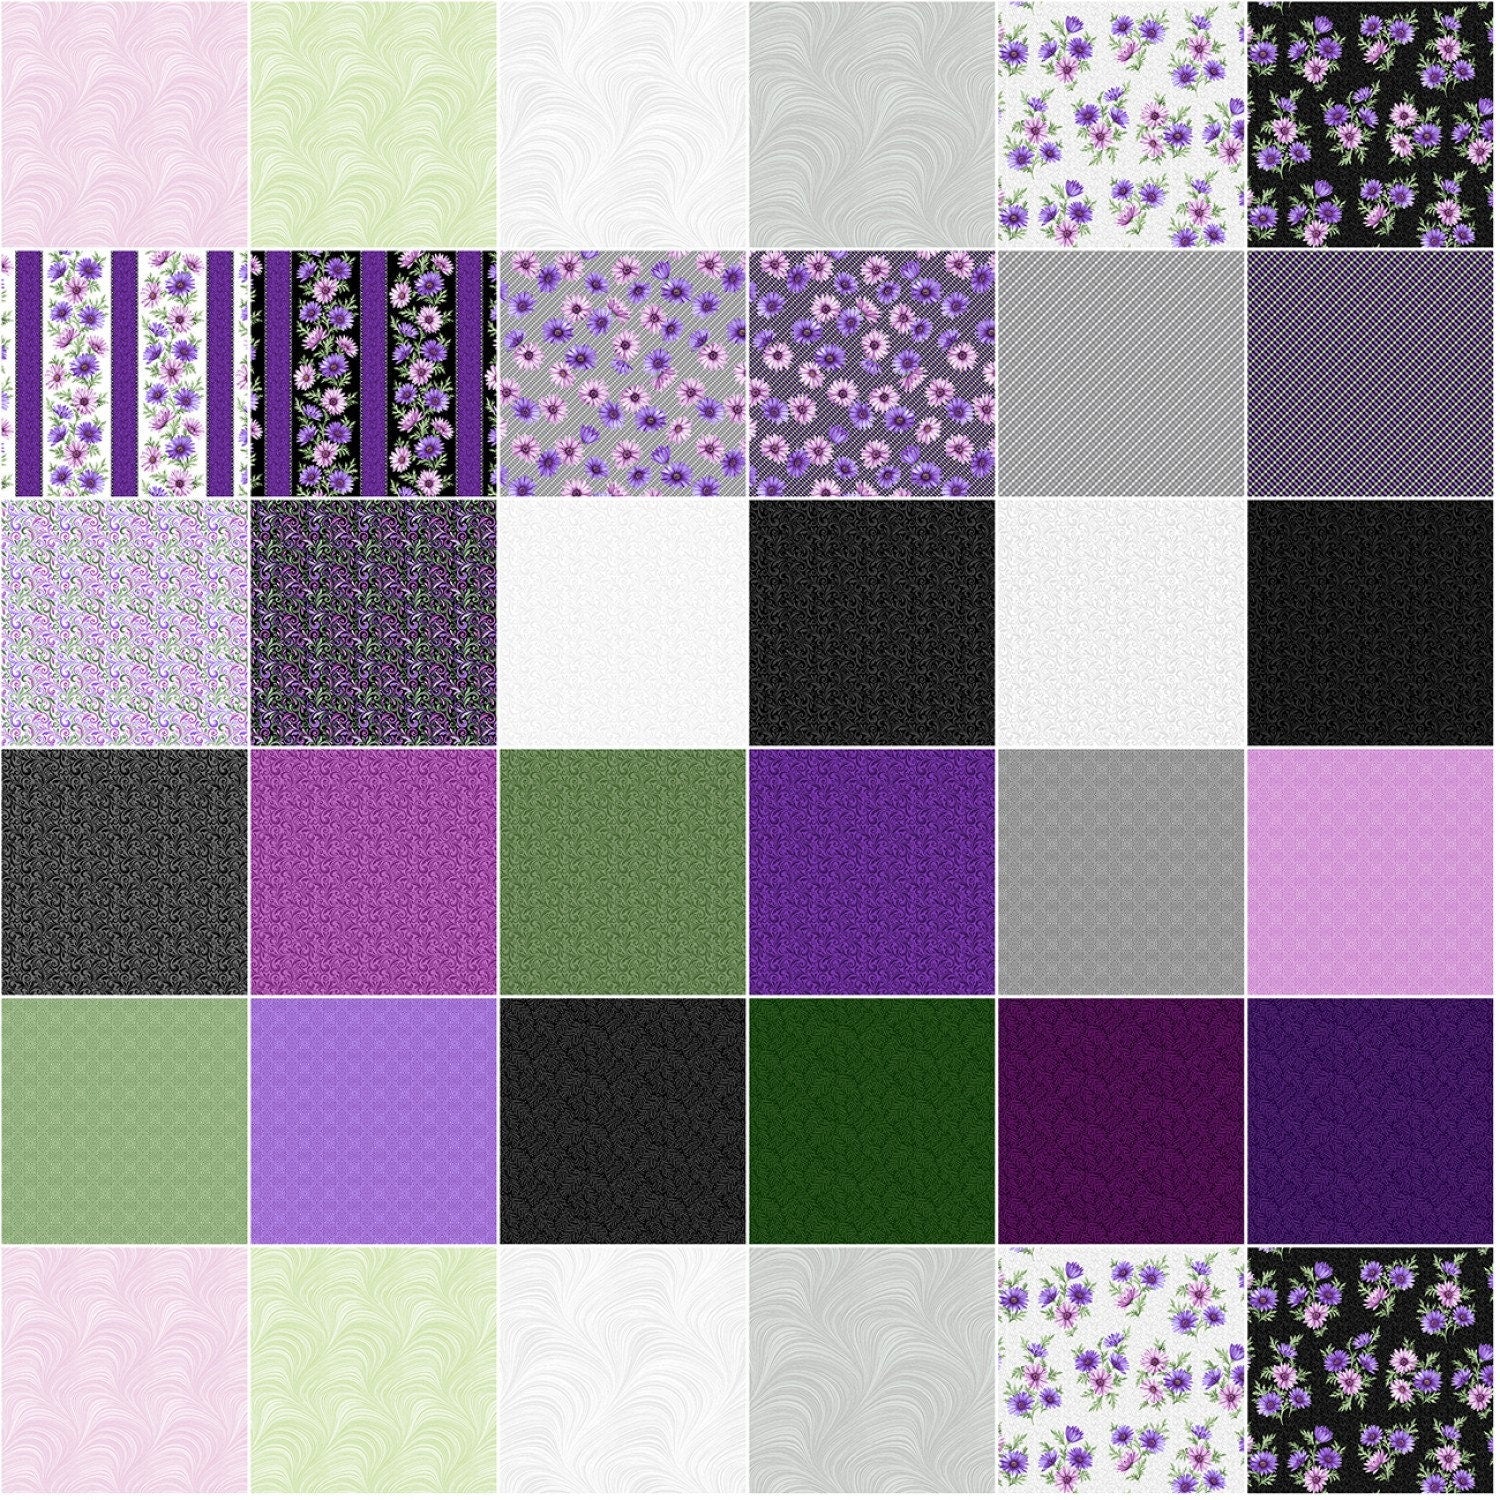 60 5 Quilting Fabric Squares PURPLE & PINKS-/BUY IT NOW!15 DIFFERENT-4 OF  EACH